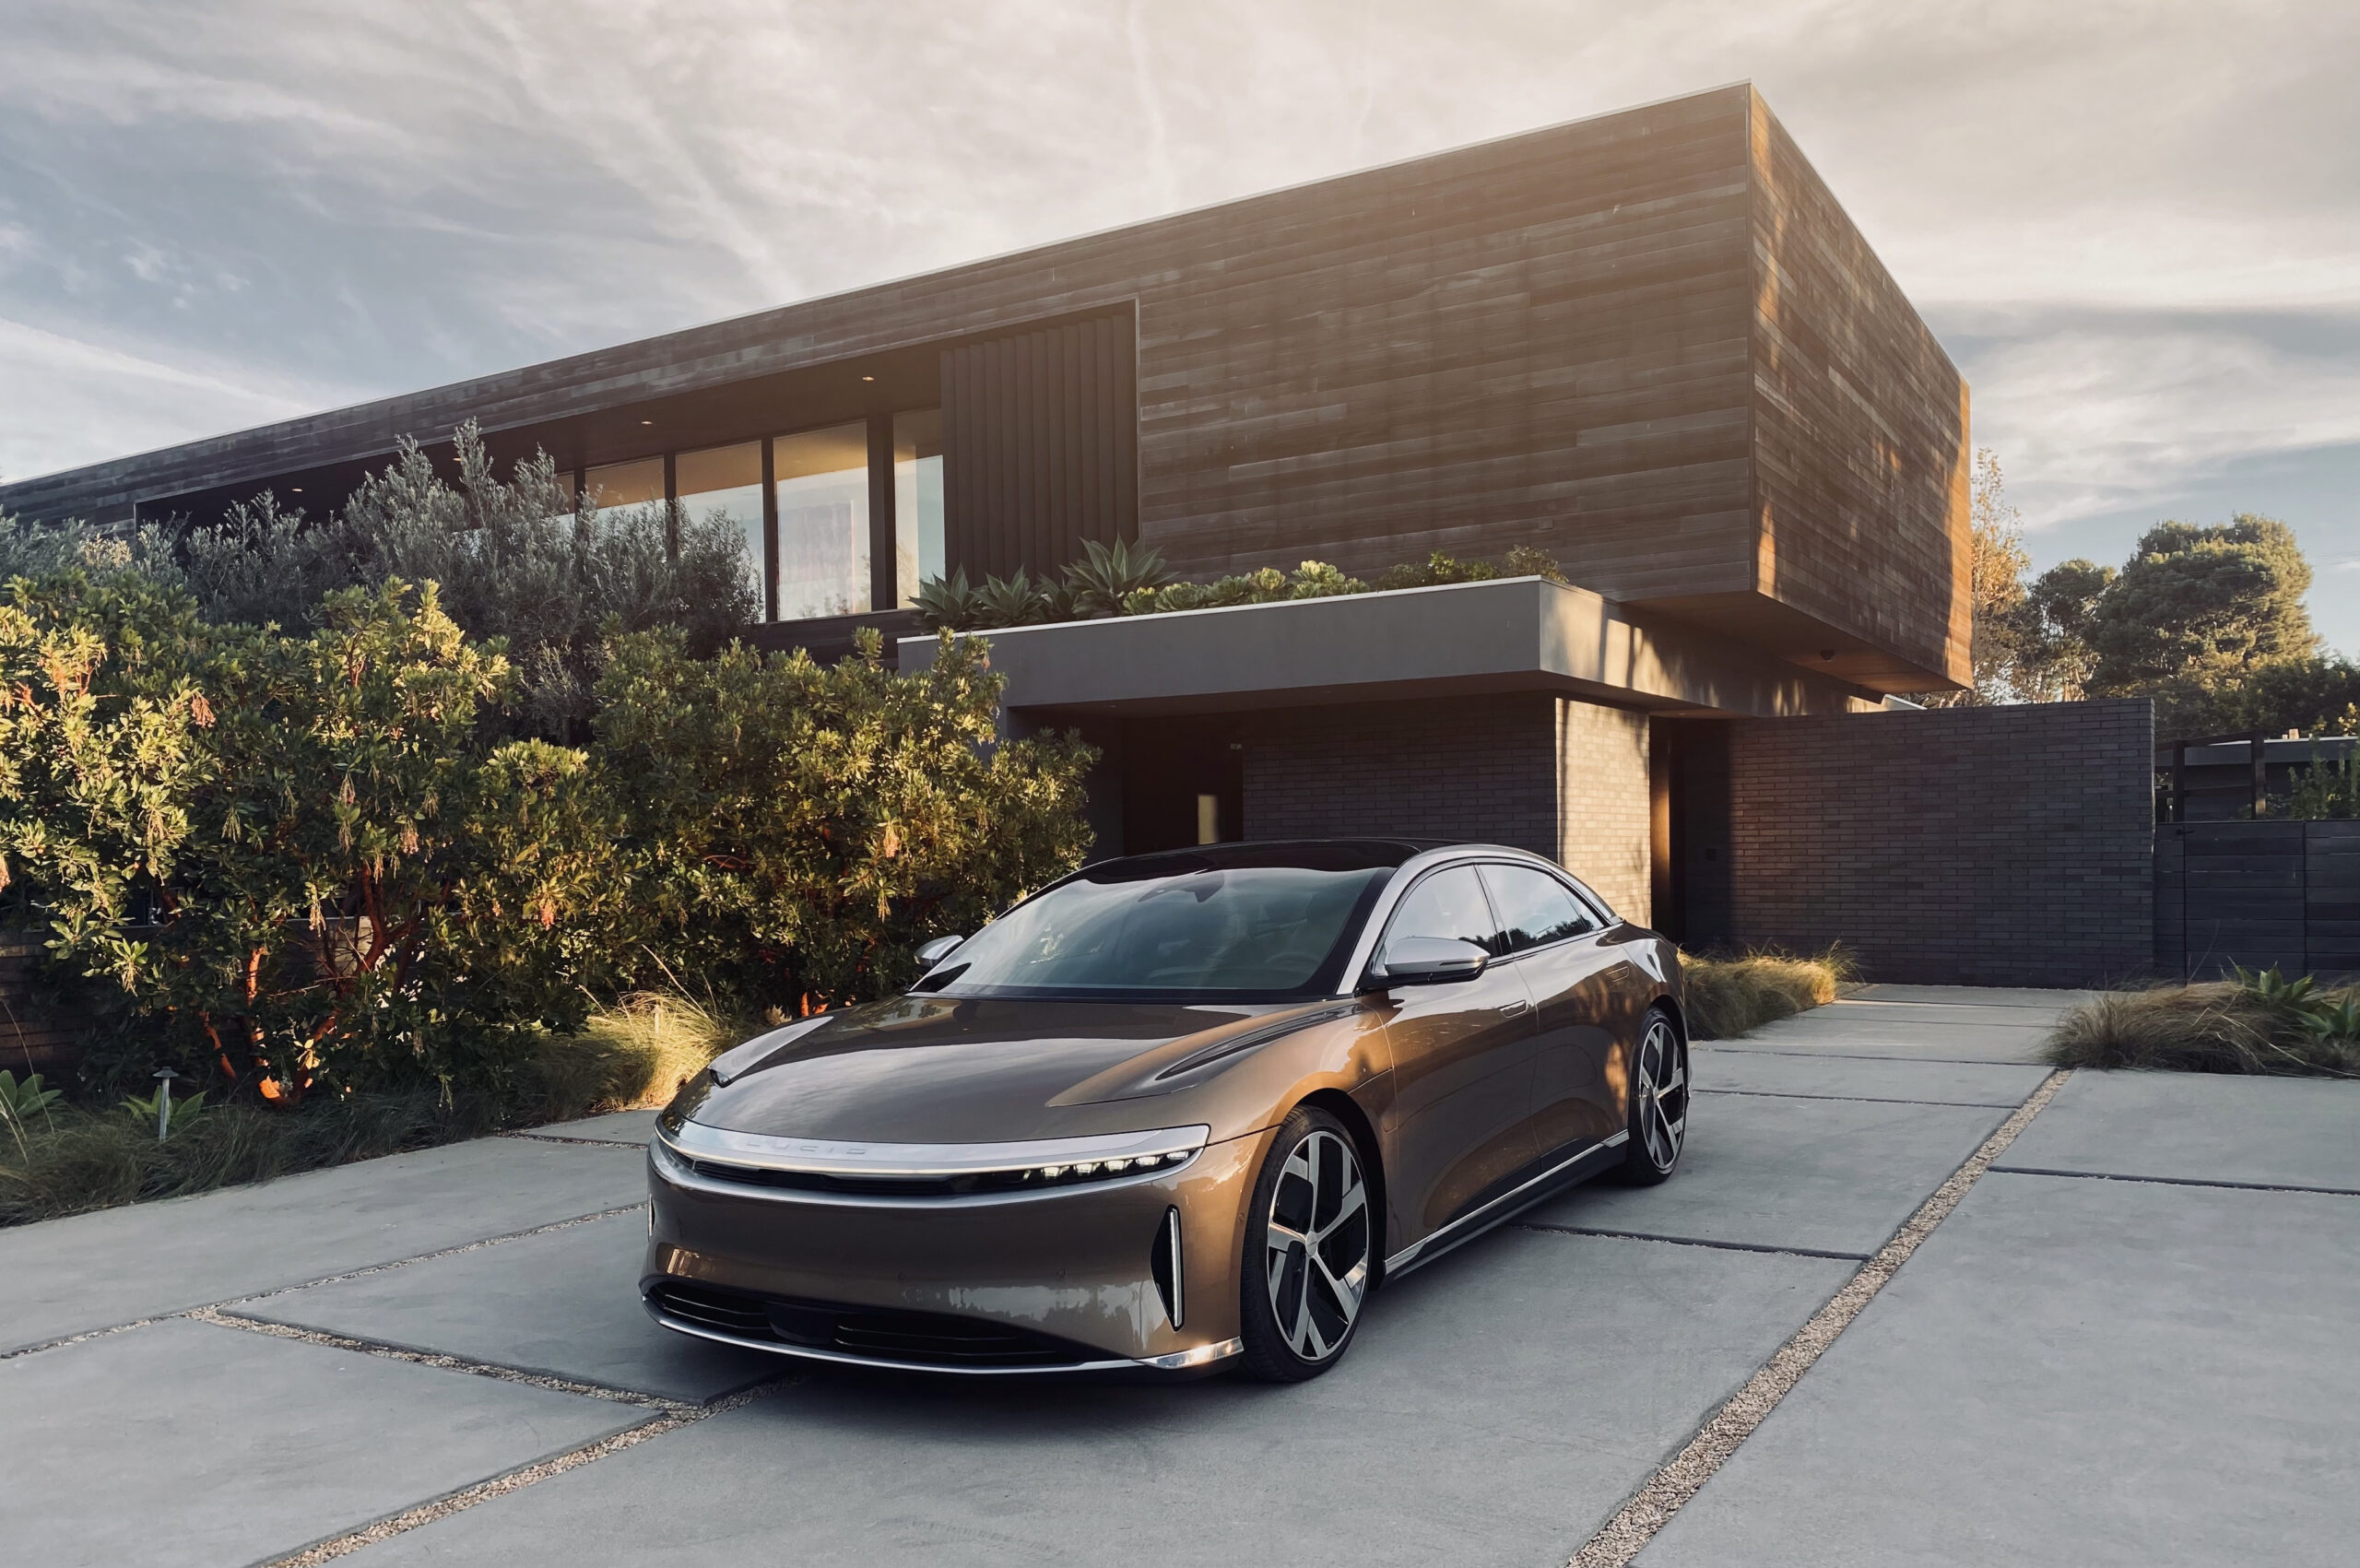 Lucid Motors Lease Calculator: How Much Does It Cost To Lease A Lucid Air